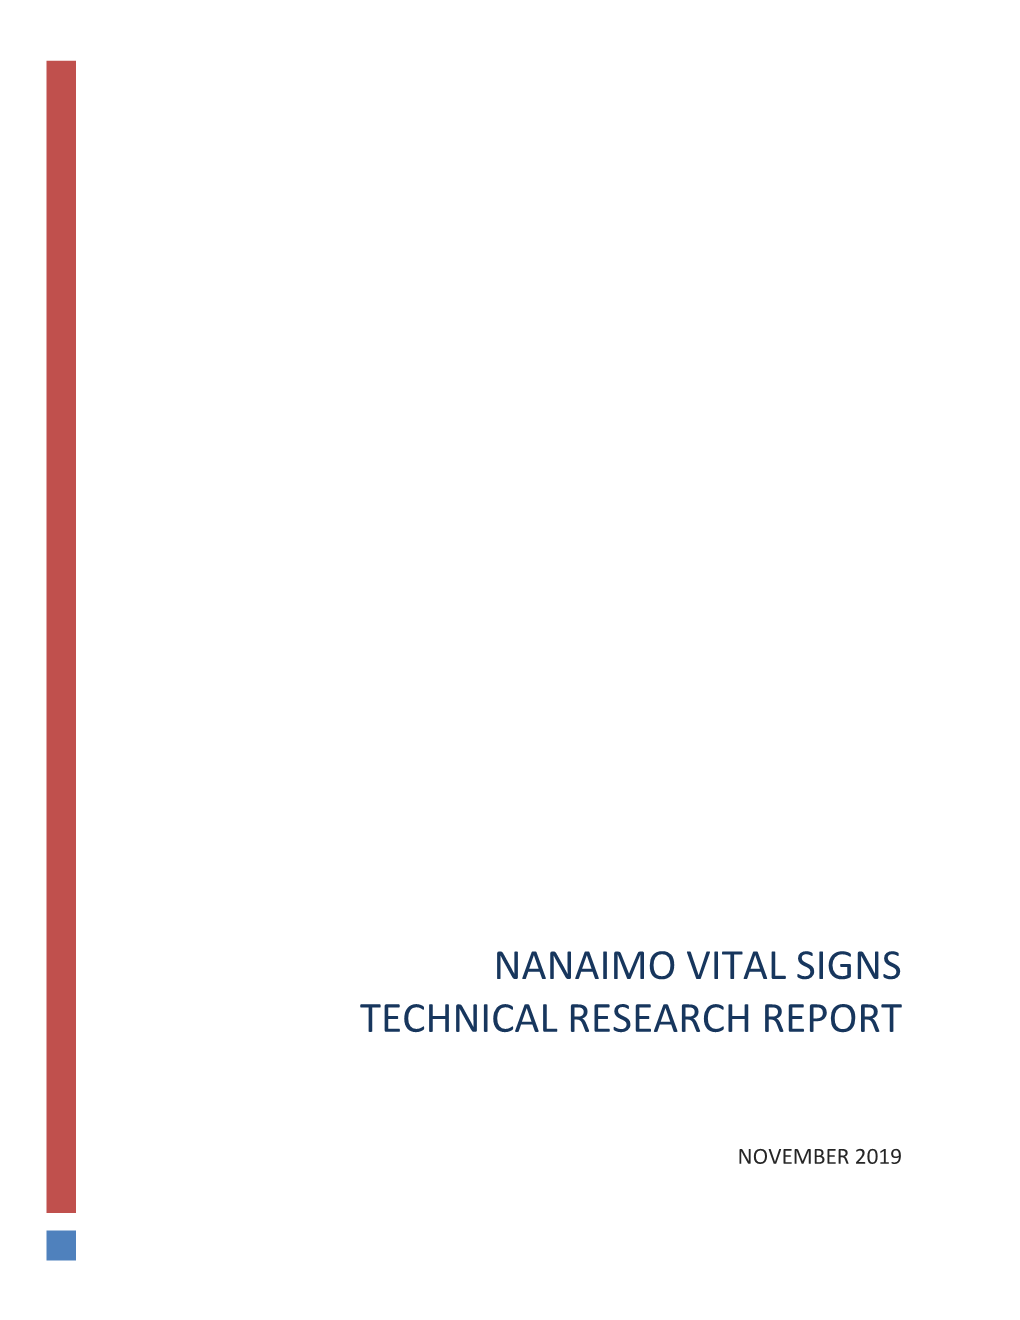 Nanaimo Vital Signs Technical Research Report